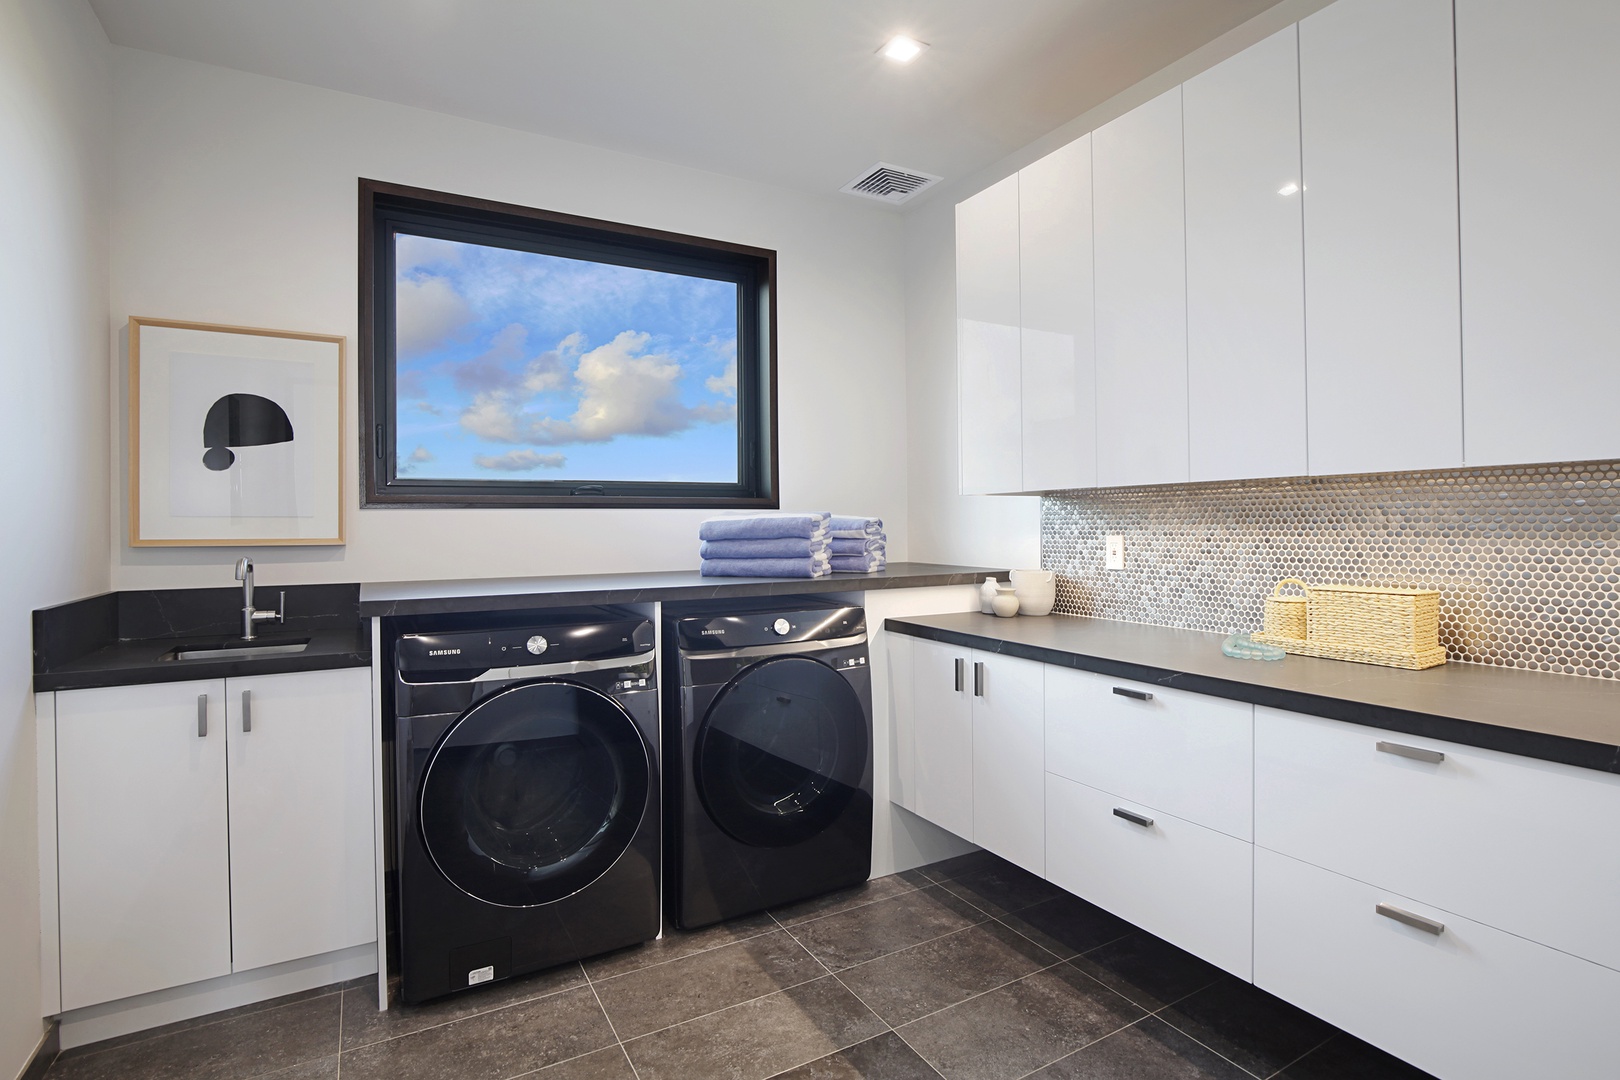 Koloa Vacation Rentals, Hale Mahina Hou - Our luxe home comes with a laundry space with a washer and a dryer to keep you fresh and clean through out your stay!